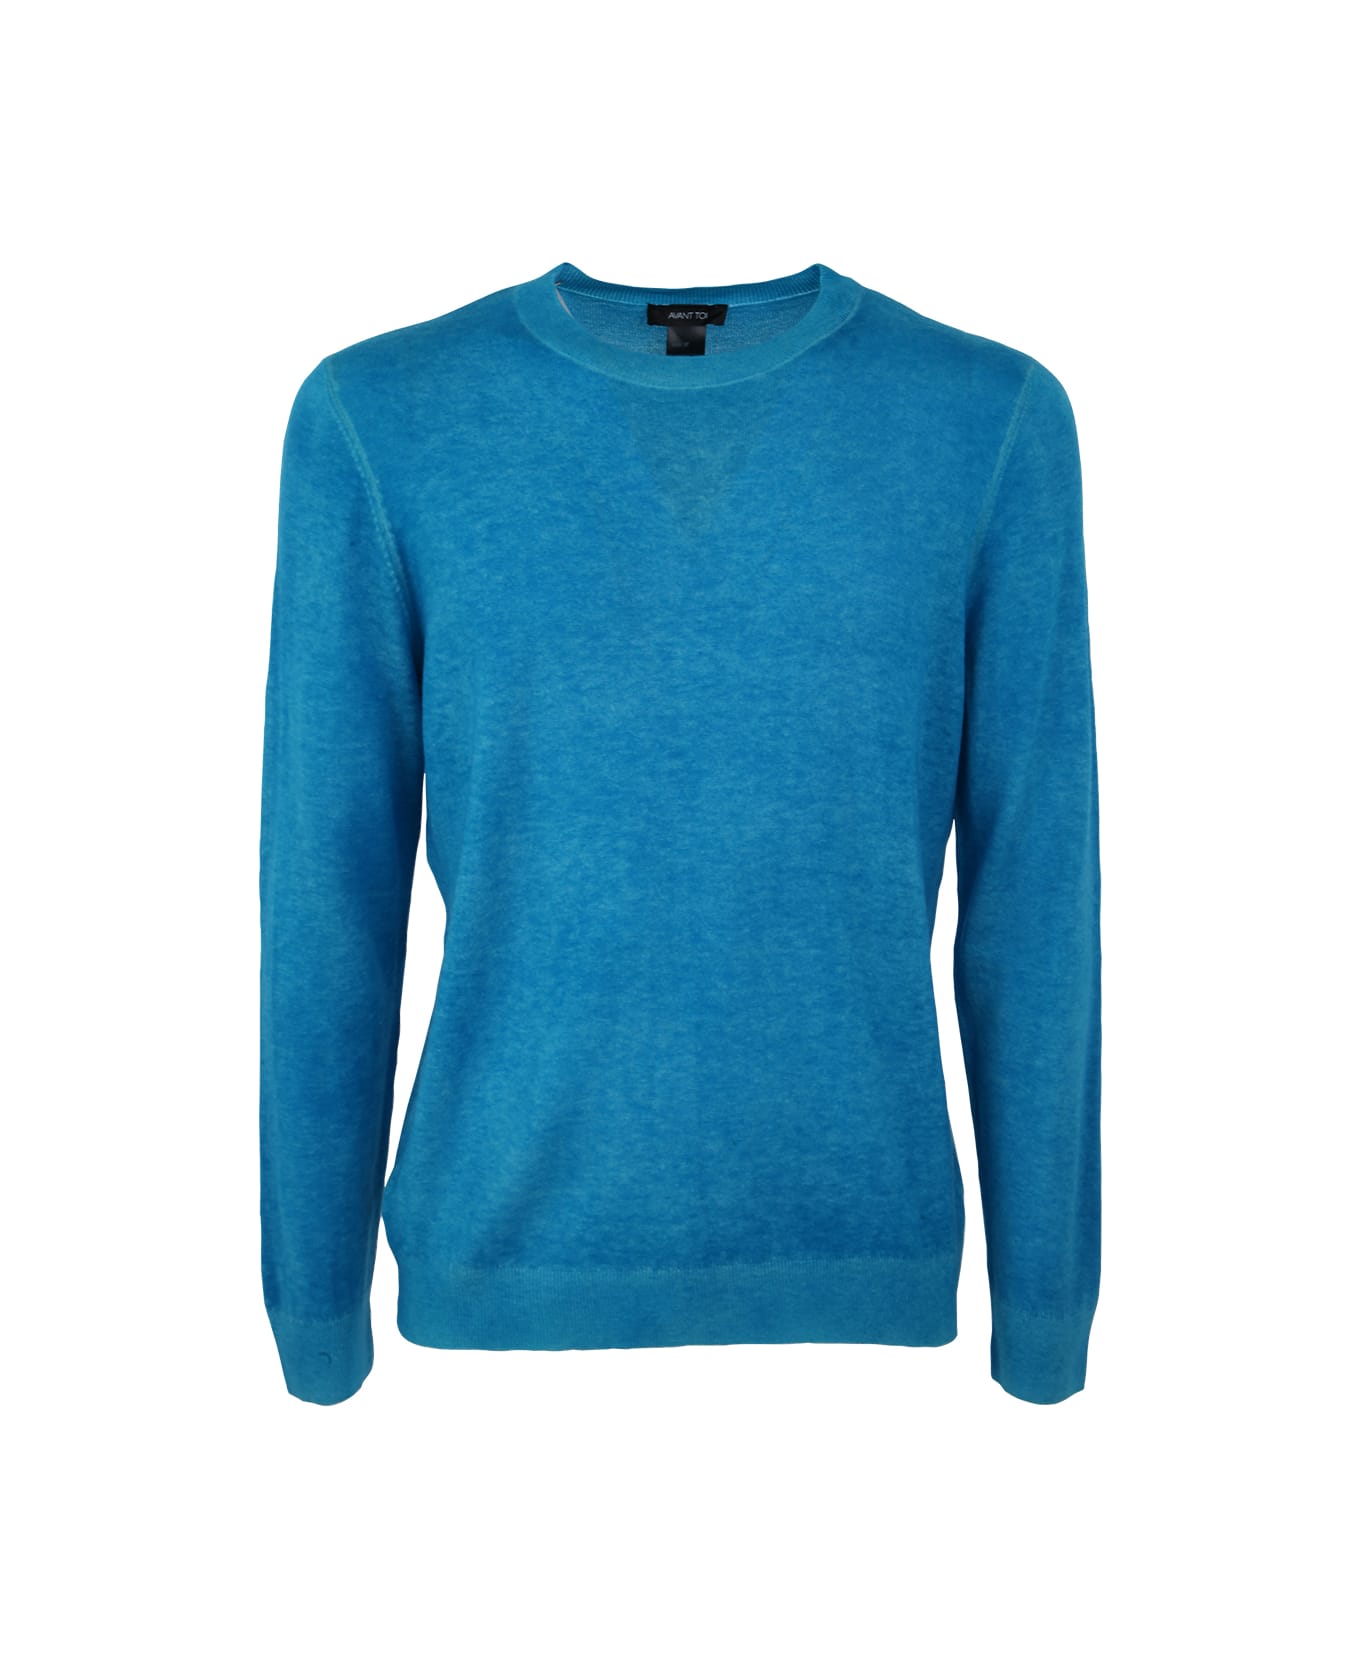 Avant Toi Light Wool Cashmere Round Neck Pullover With Destroyed Edges - Curacao